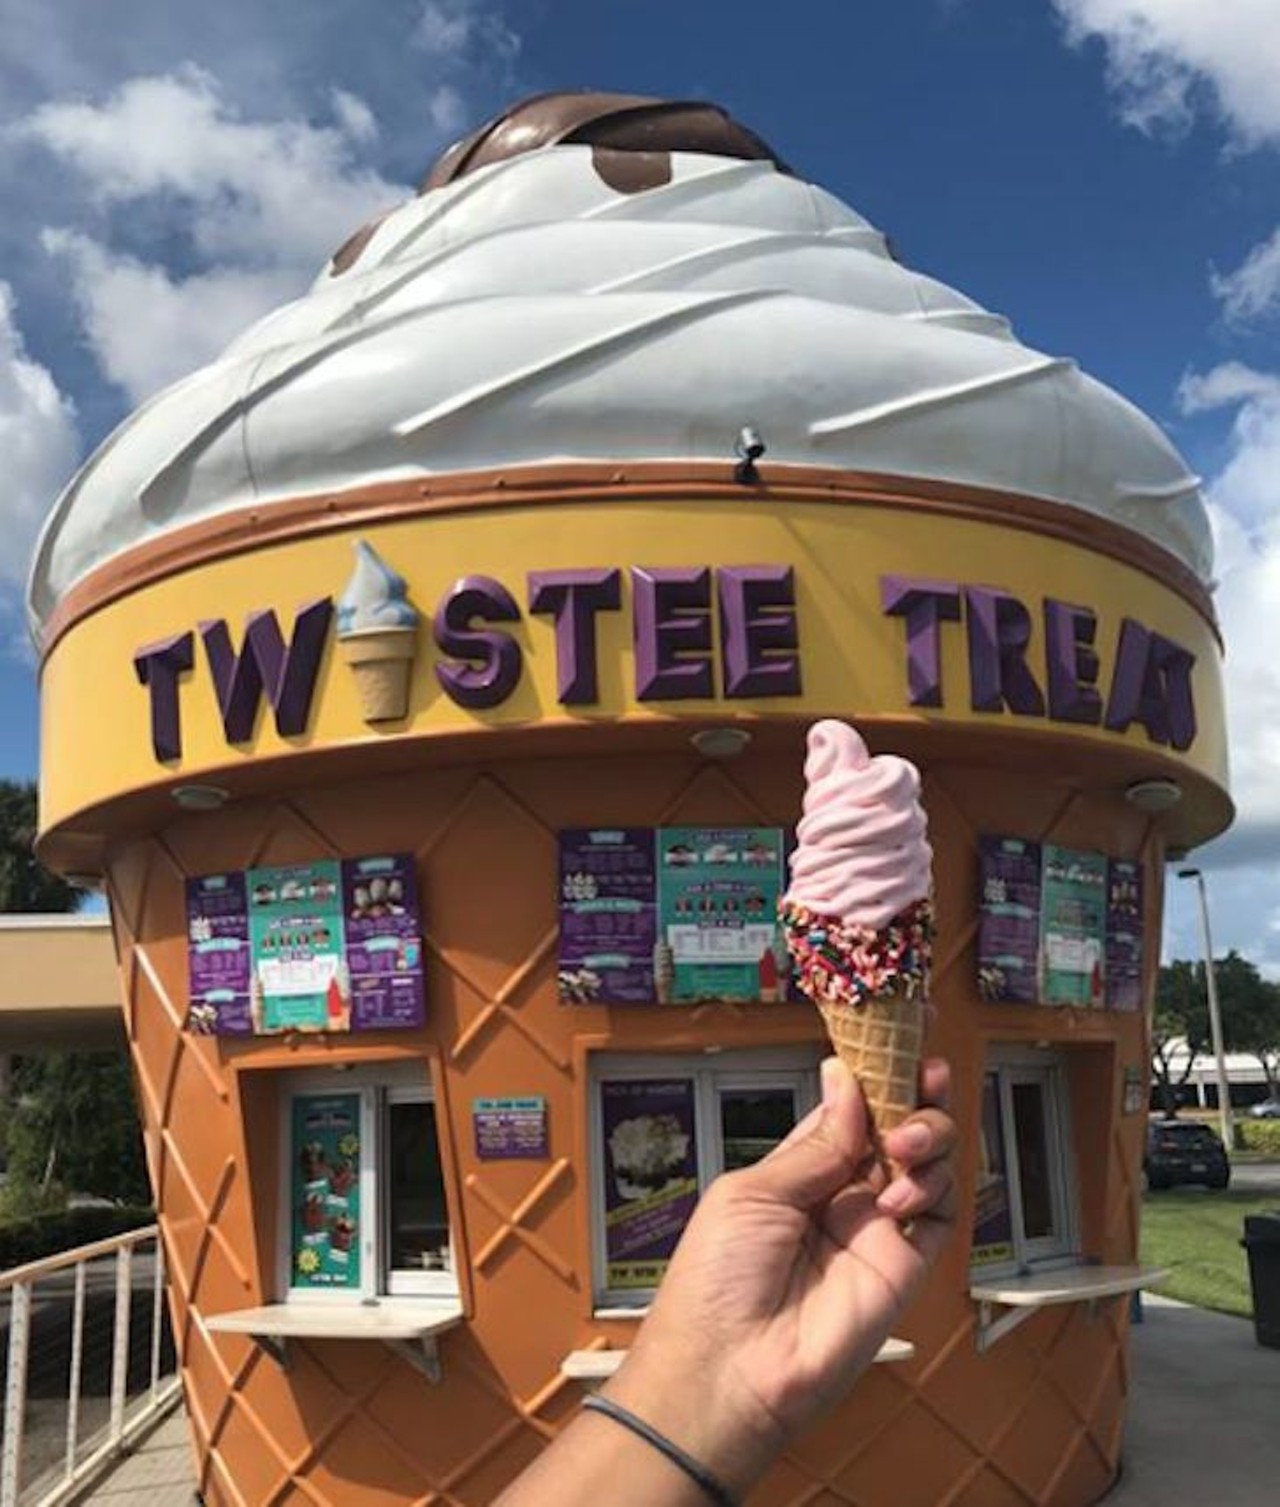 Twistee Treat
Locations: 2 Orlando, 7 Kissimmee, Clermont, Davenport, New Smyrna Beach, Cape Canaveral, Daytona Beach, Melbourne, Ocala, Tampa Metro Area, Sebring, Homosassa
Twistee Treats&#146; giant ice cream cone buildings have been popping up around Central Florida and serving homemade soft-serve ice cream ever since 1987. This place offers ice cream in all forms, such as twirls, sundaes, shakes/malts, waffle taco, cookiewich, brownie boat, banana split and more.
Photo via Twistee Treat USA (UCF)/Facebook